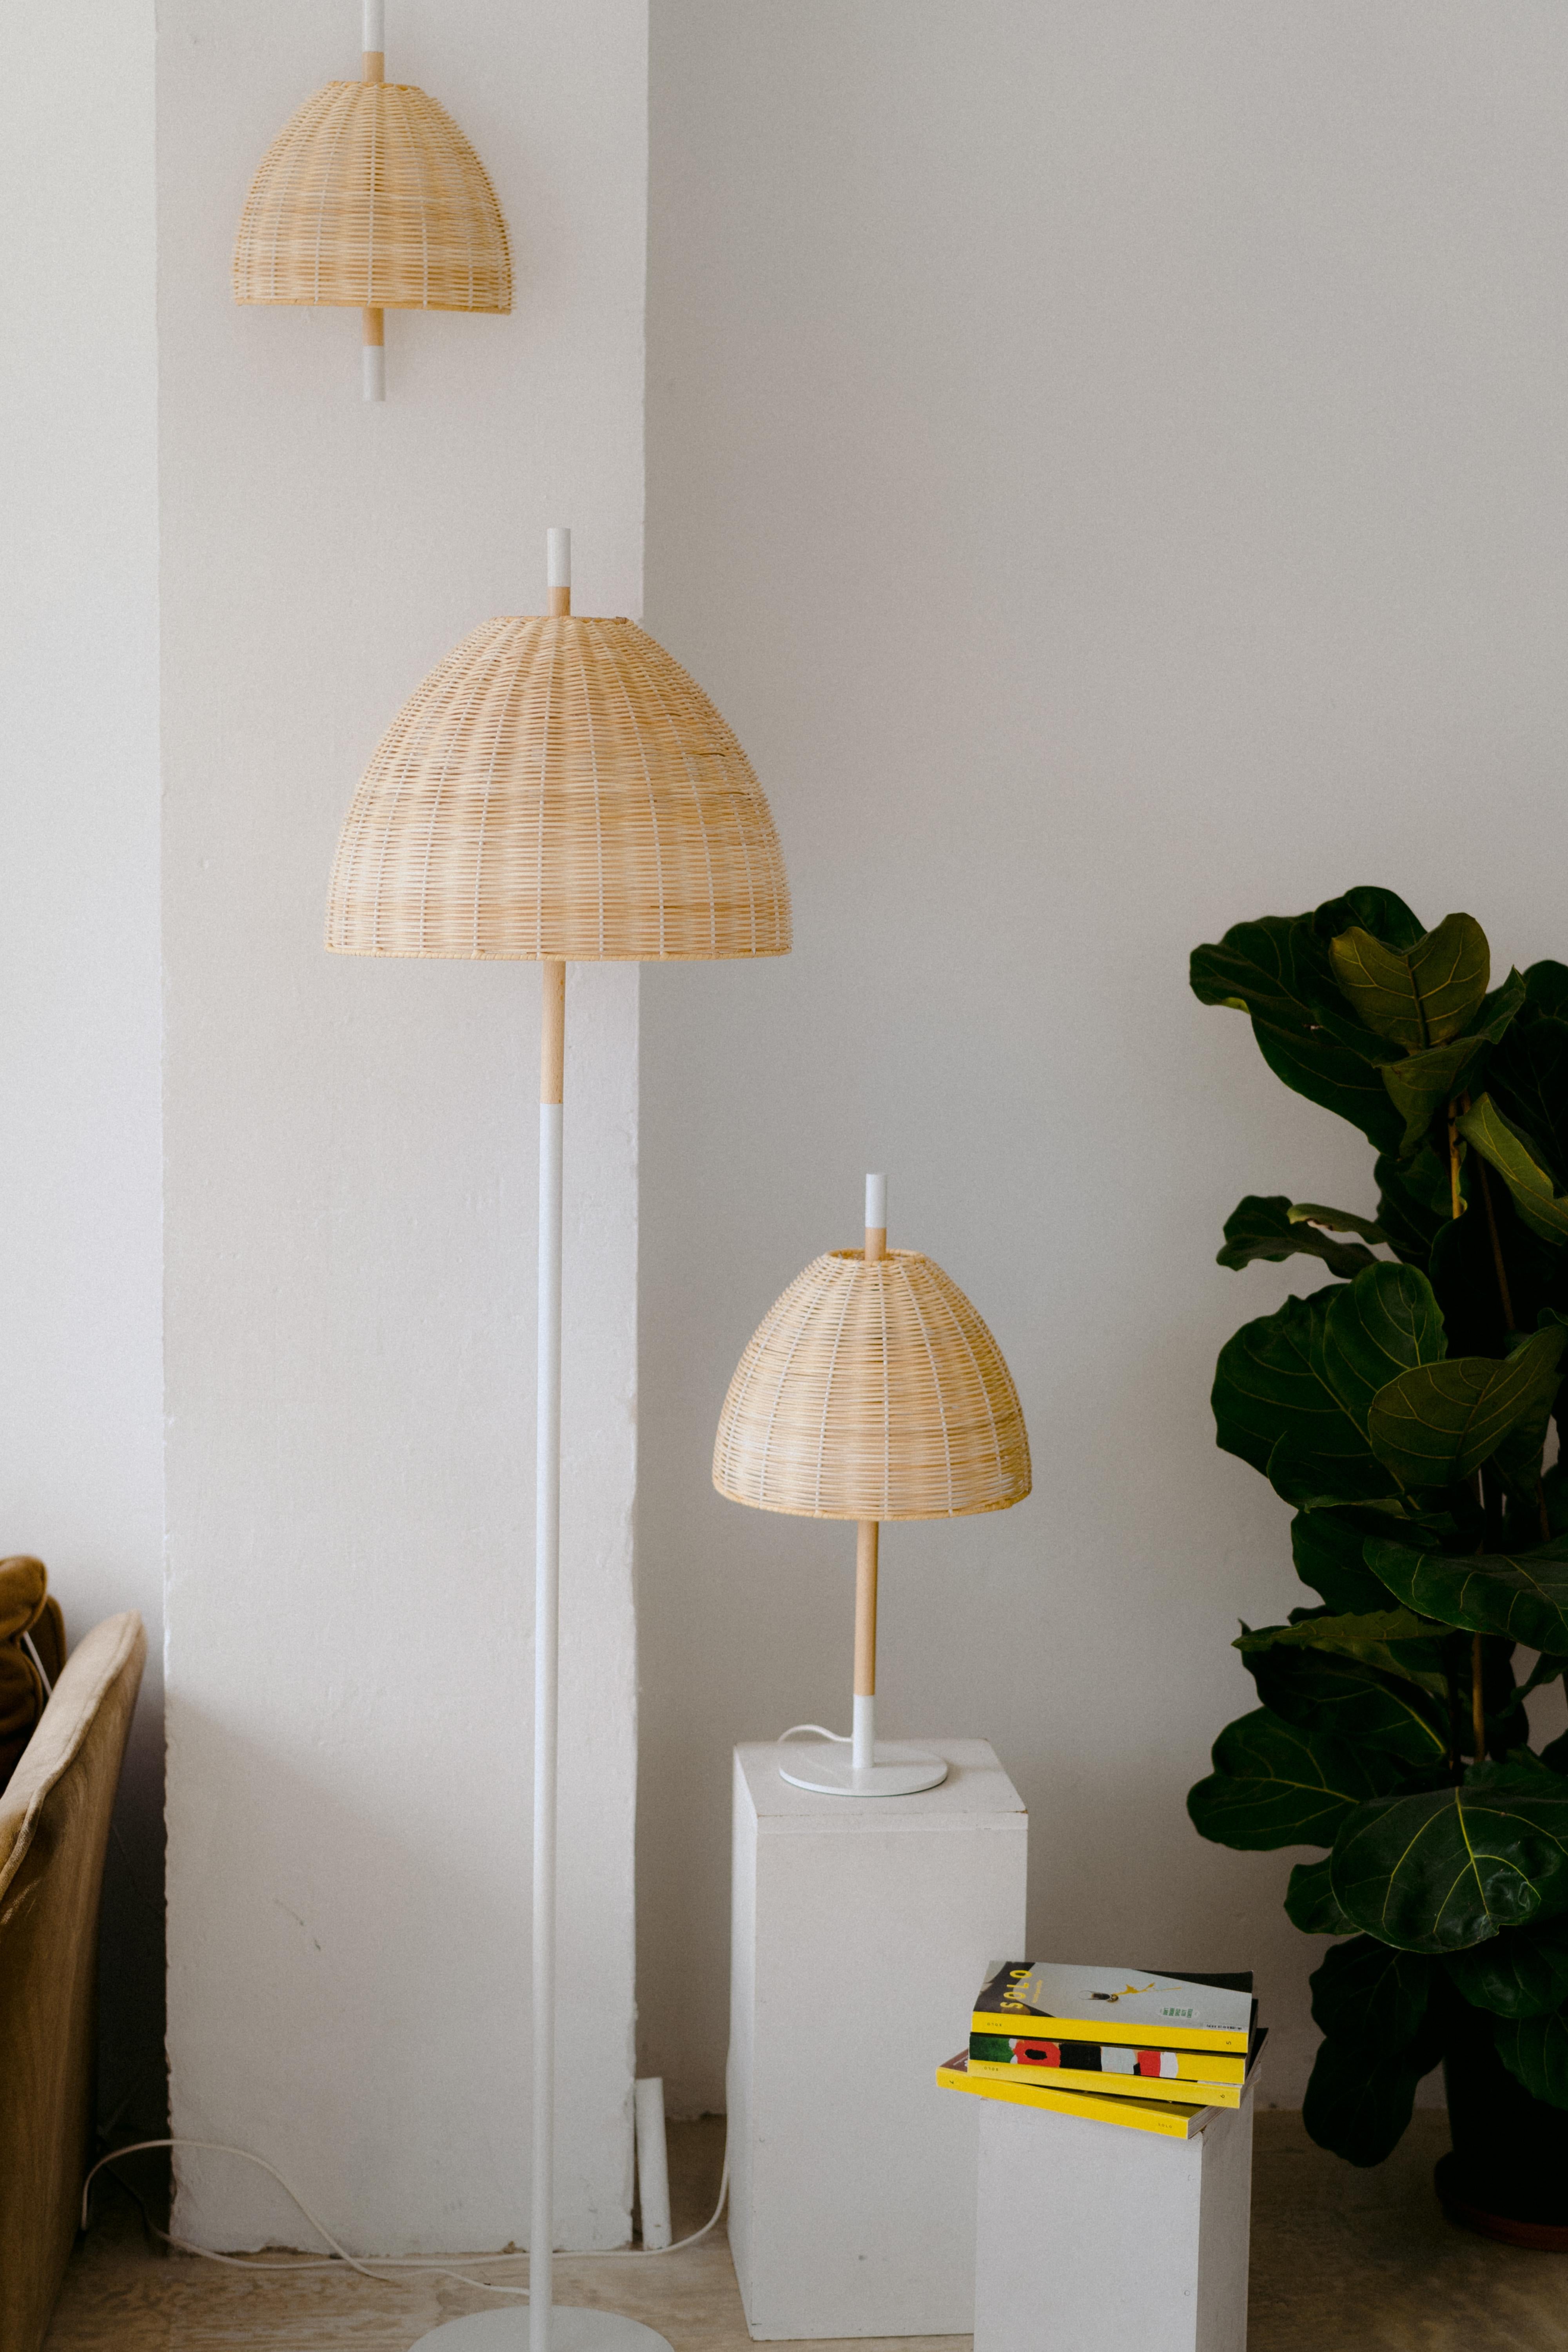 Modern Contemporary, Handmade, Table Lamp, Natural Rattan, White For Sale